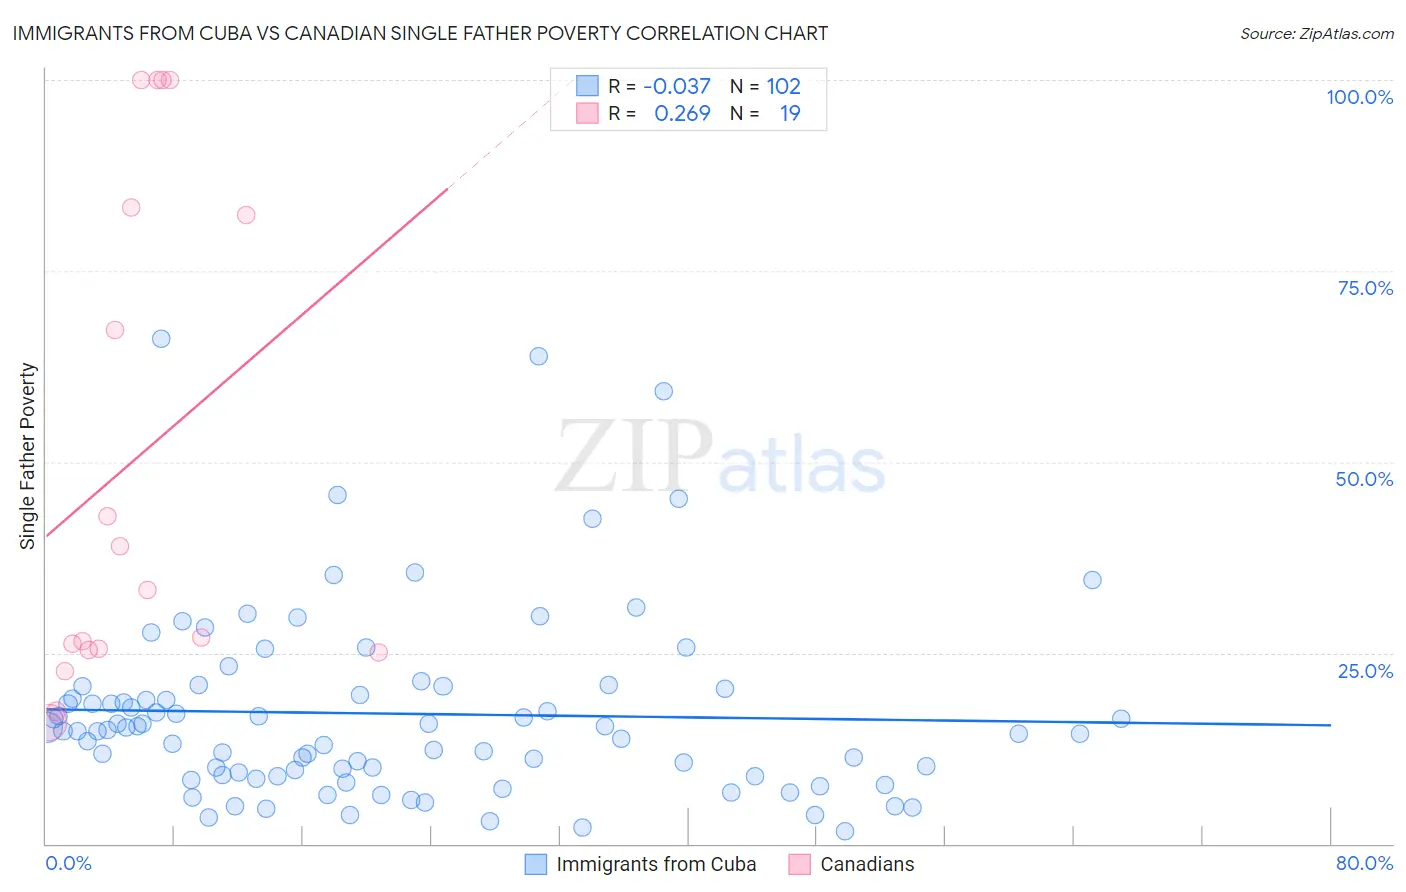 Immigrants from Cuba vs Canadian Single Father Poverty